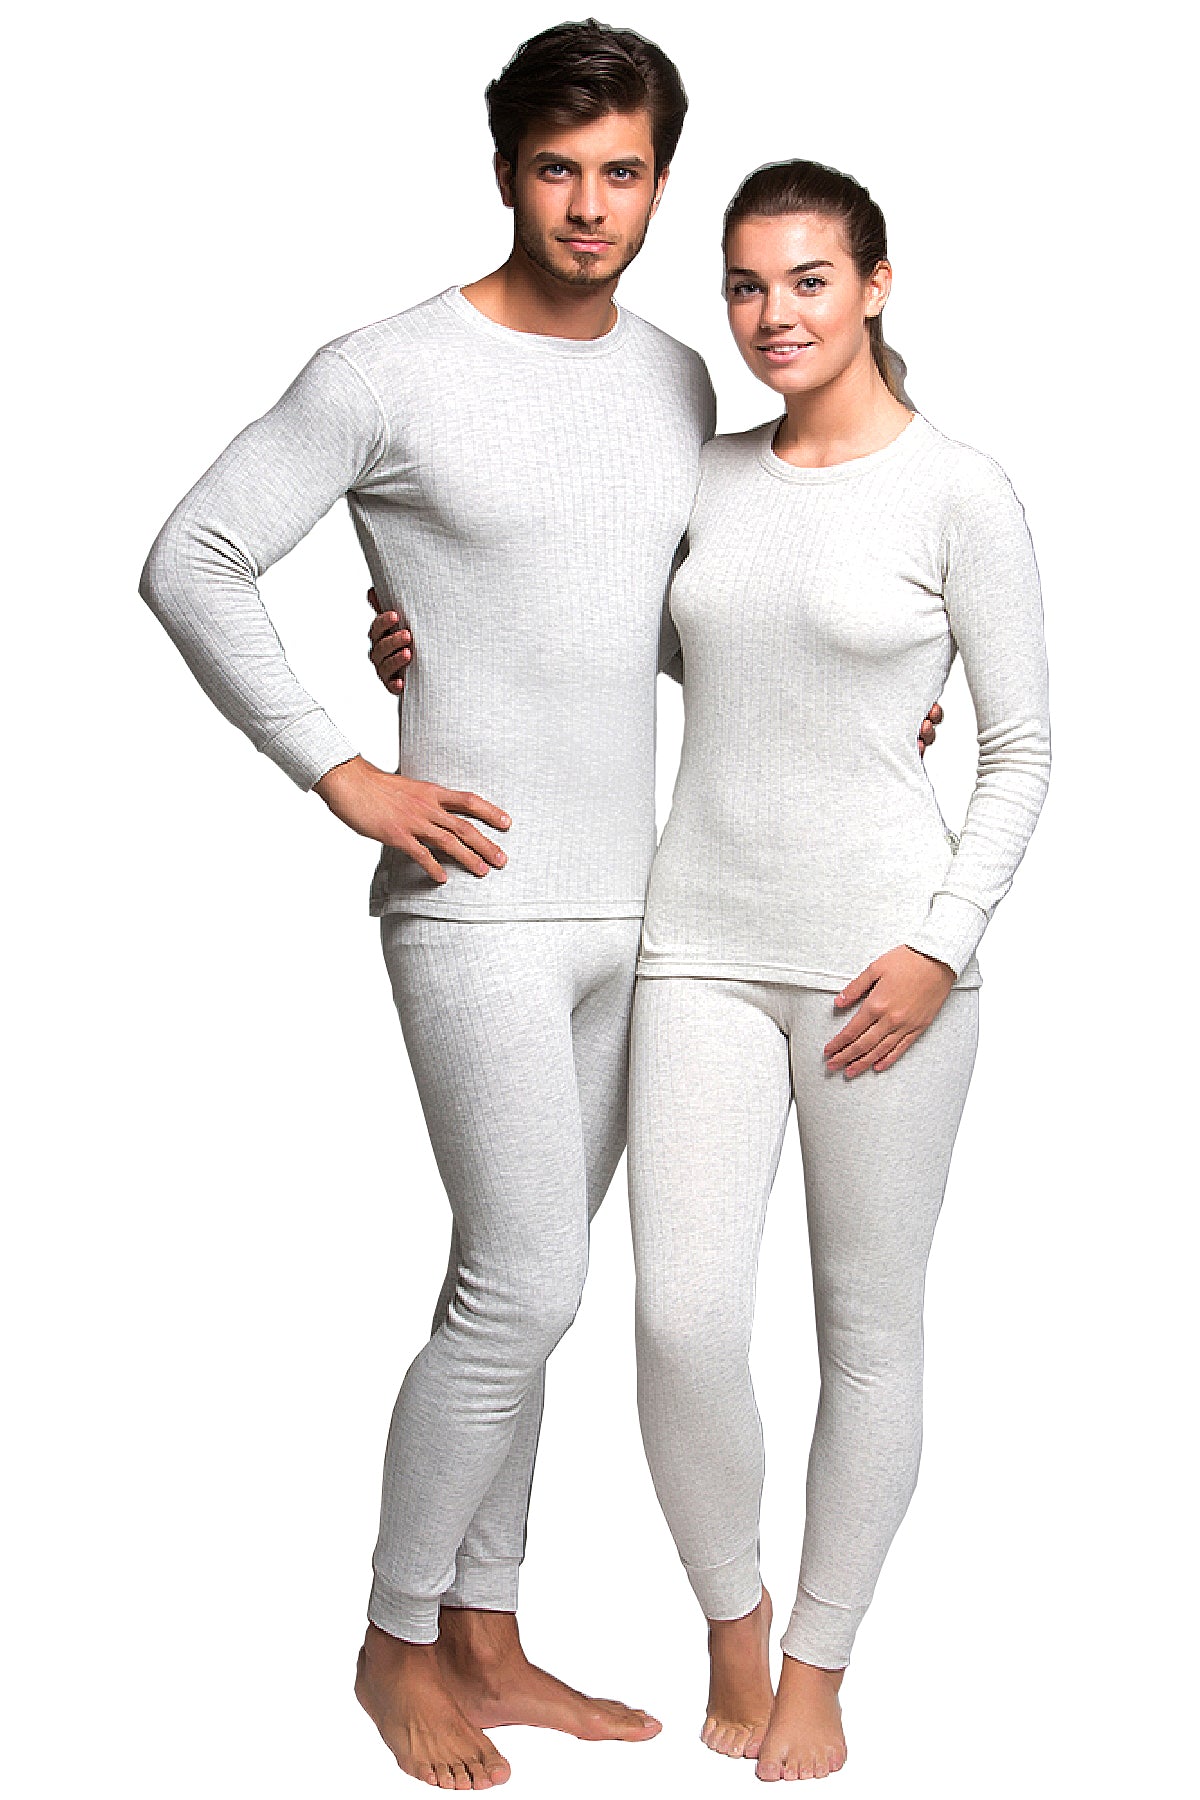 Wholesale seamless thermal underwear For Intimate Warmth And